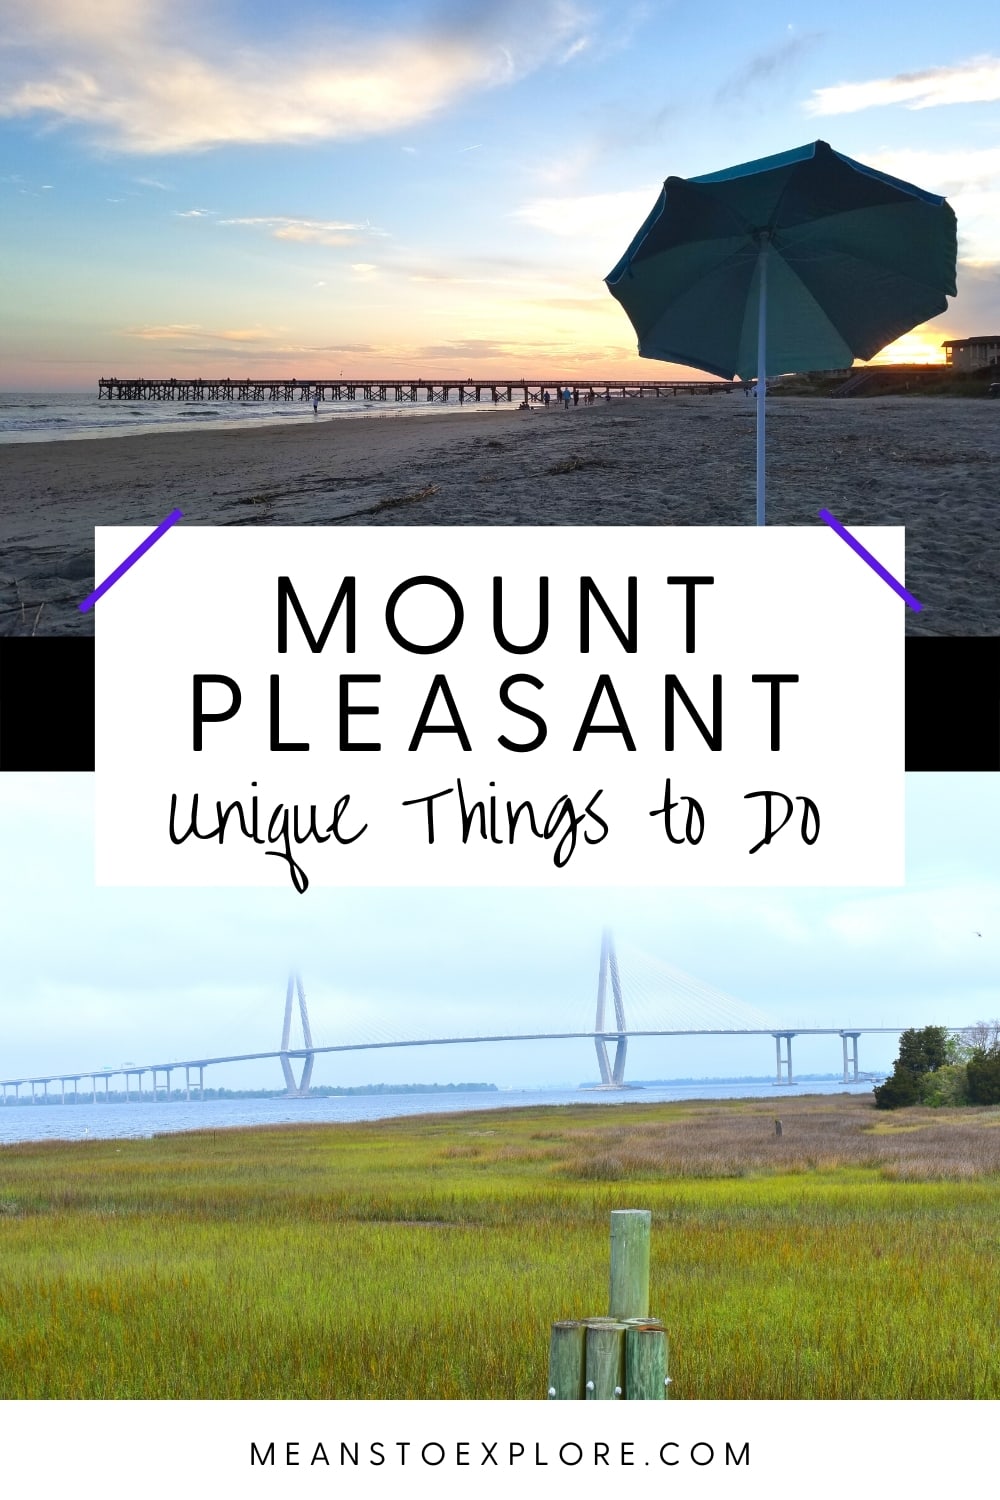 15 Unique Things to Do in Mount Pleasant, SC {+ Isle of Palms & Sullivan’s Island}